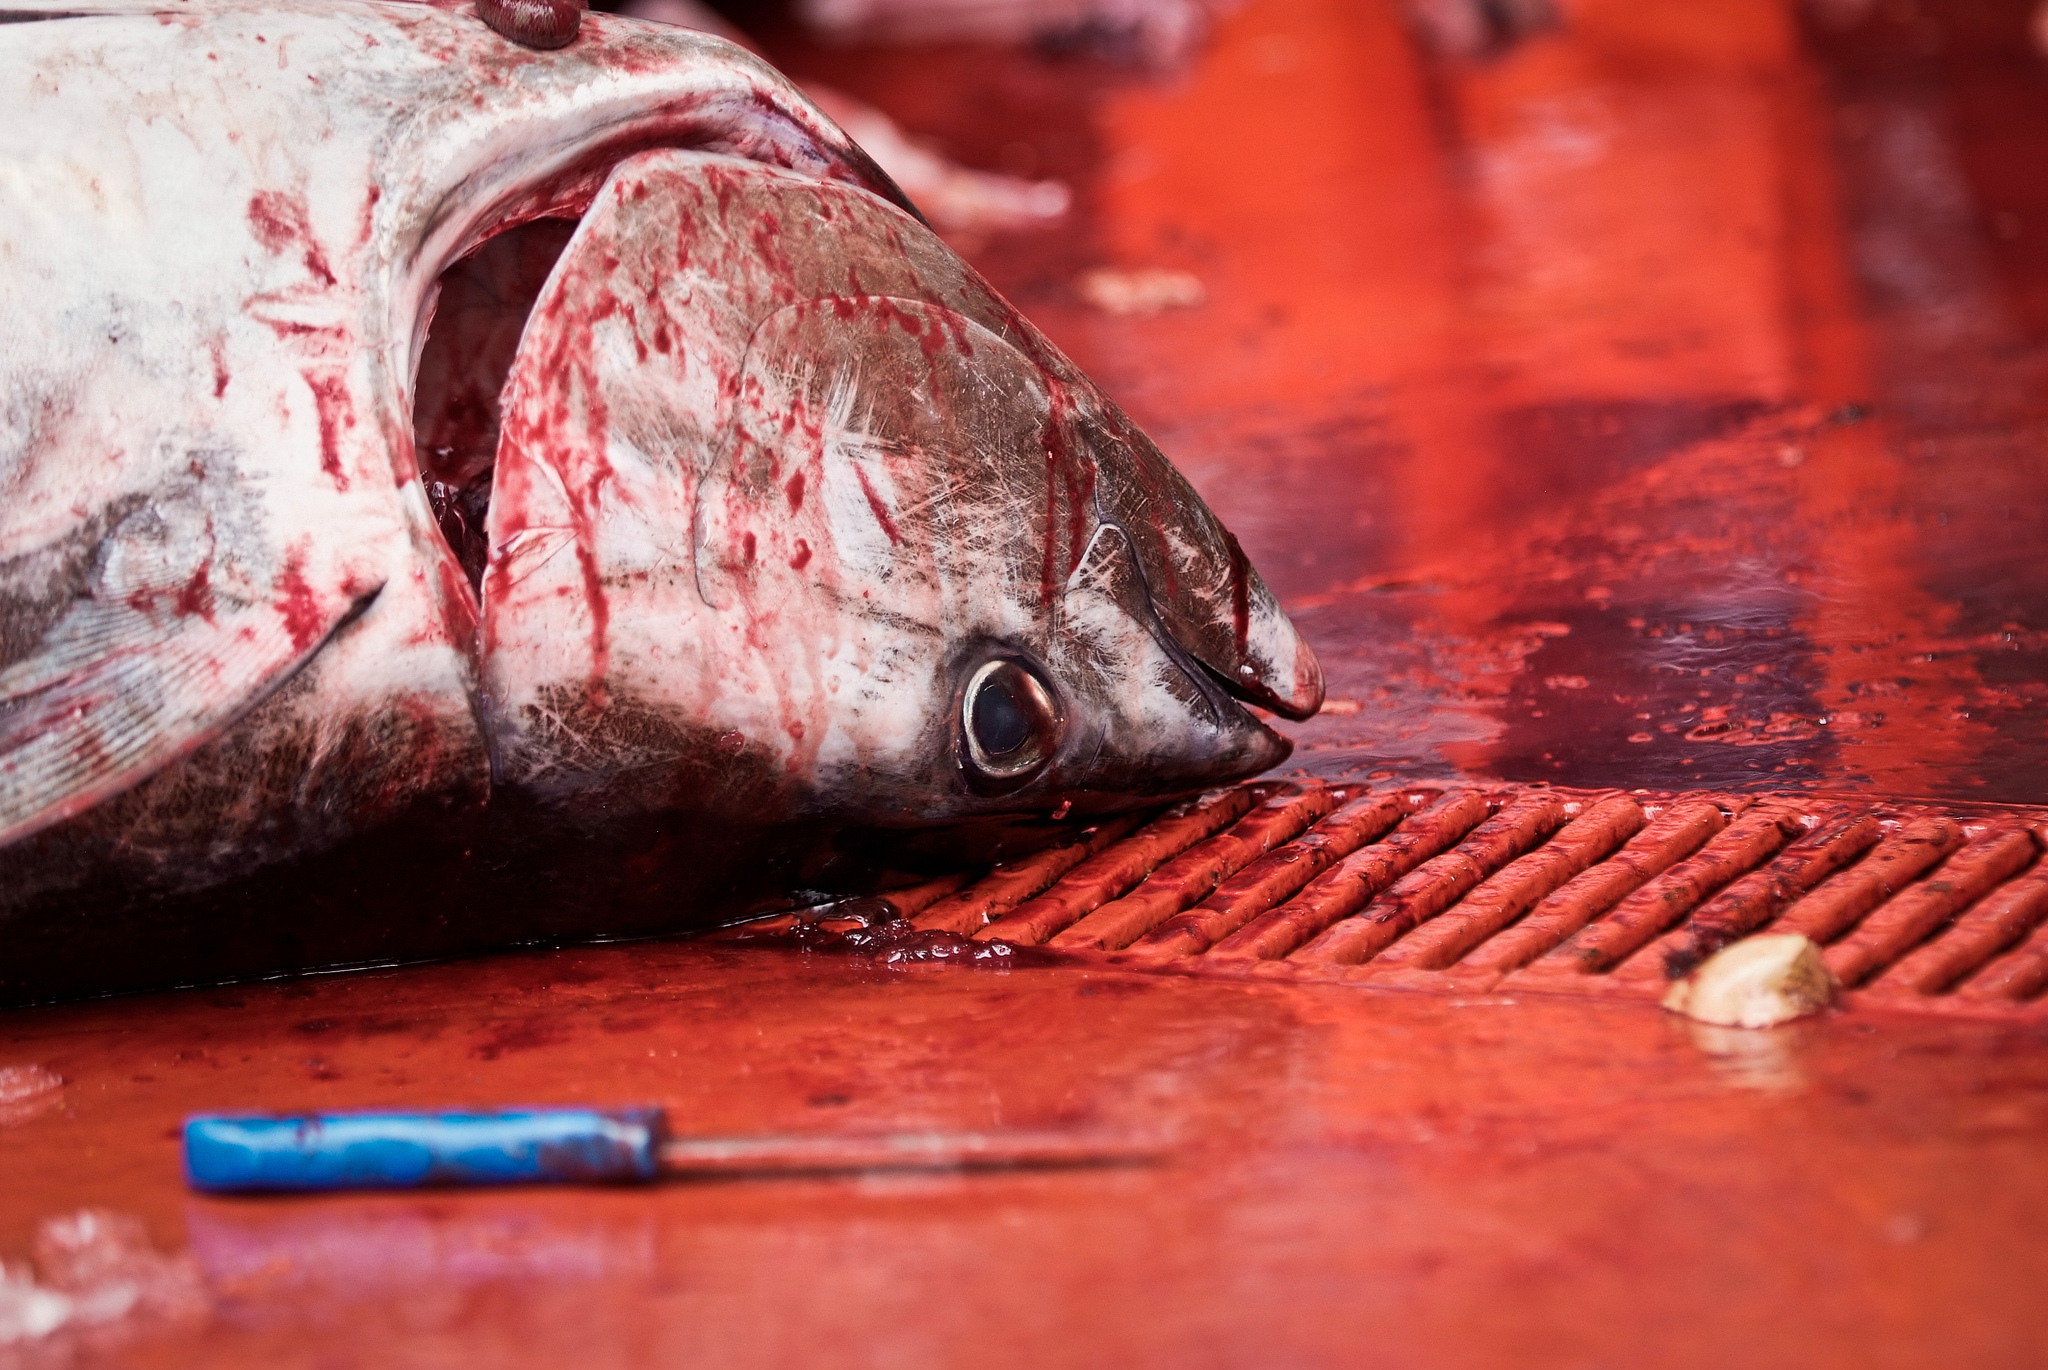 A dead fish on a bloodied floor